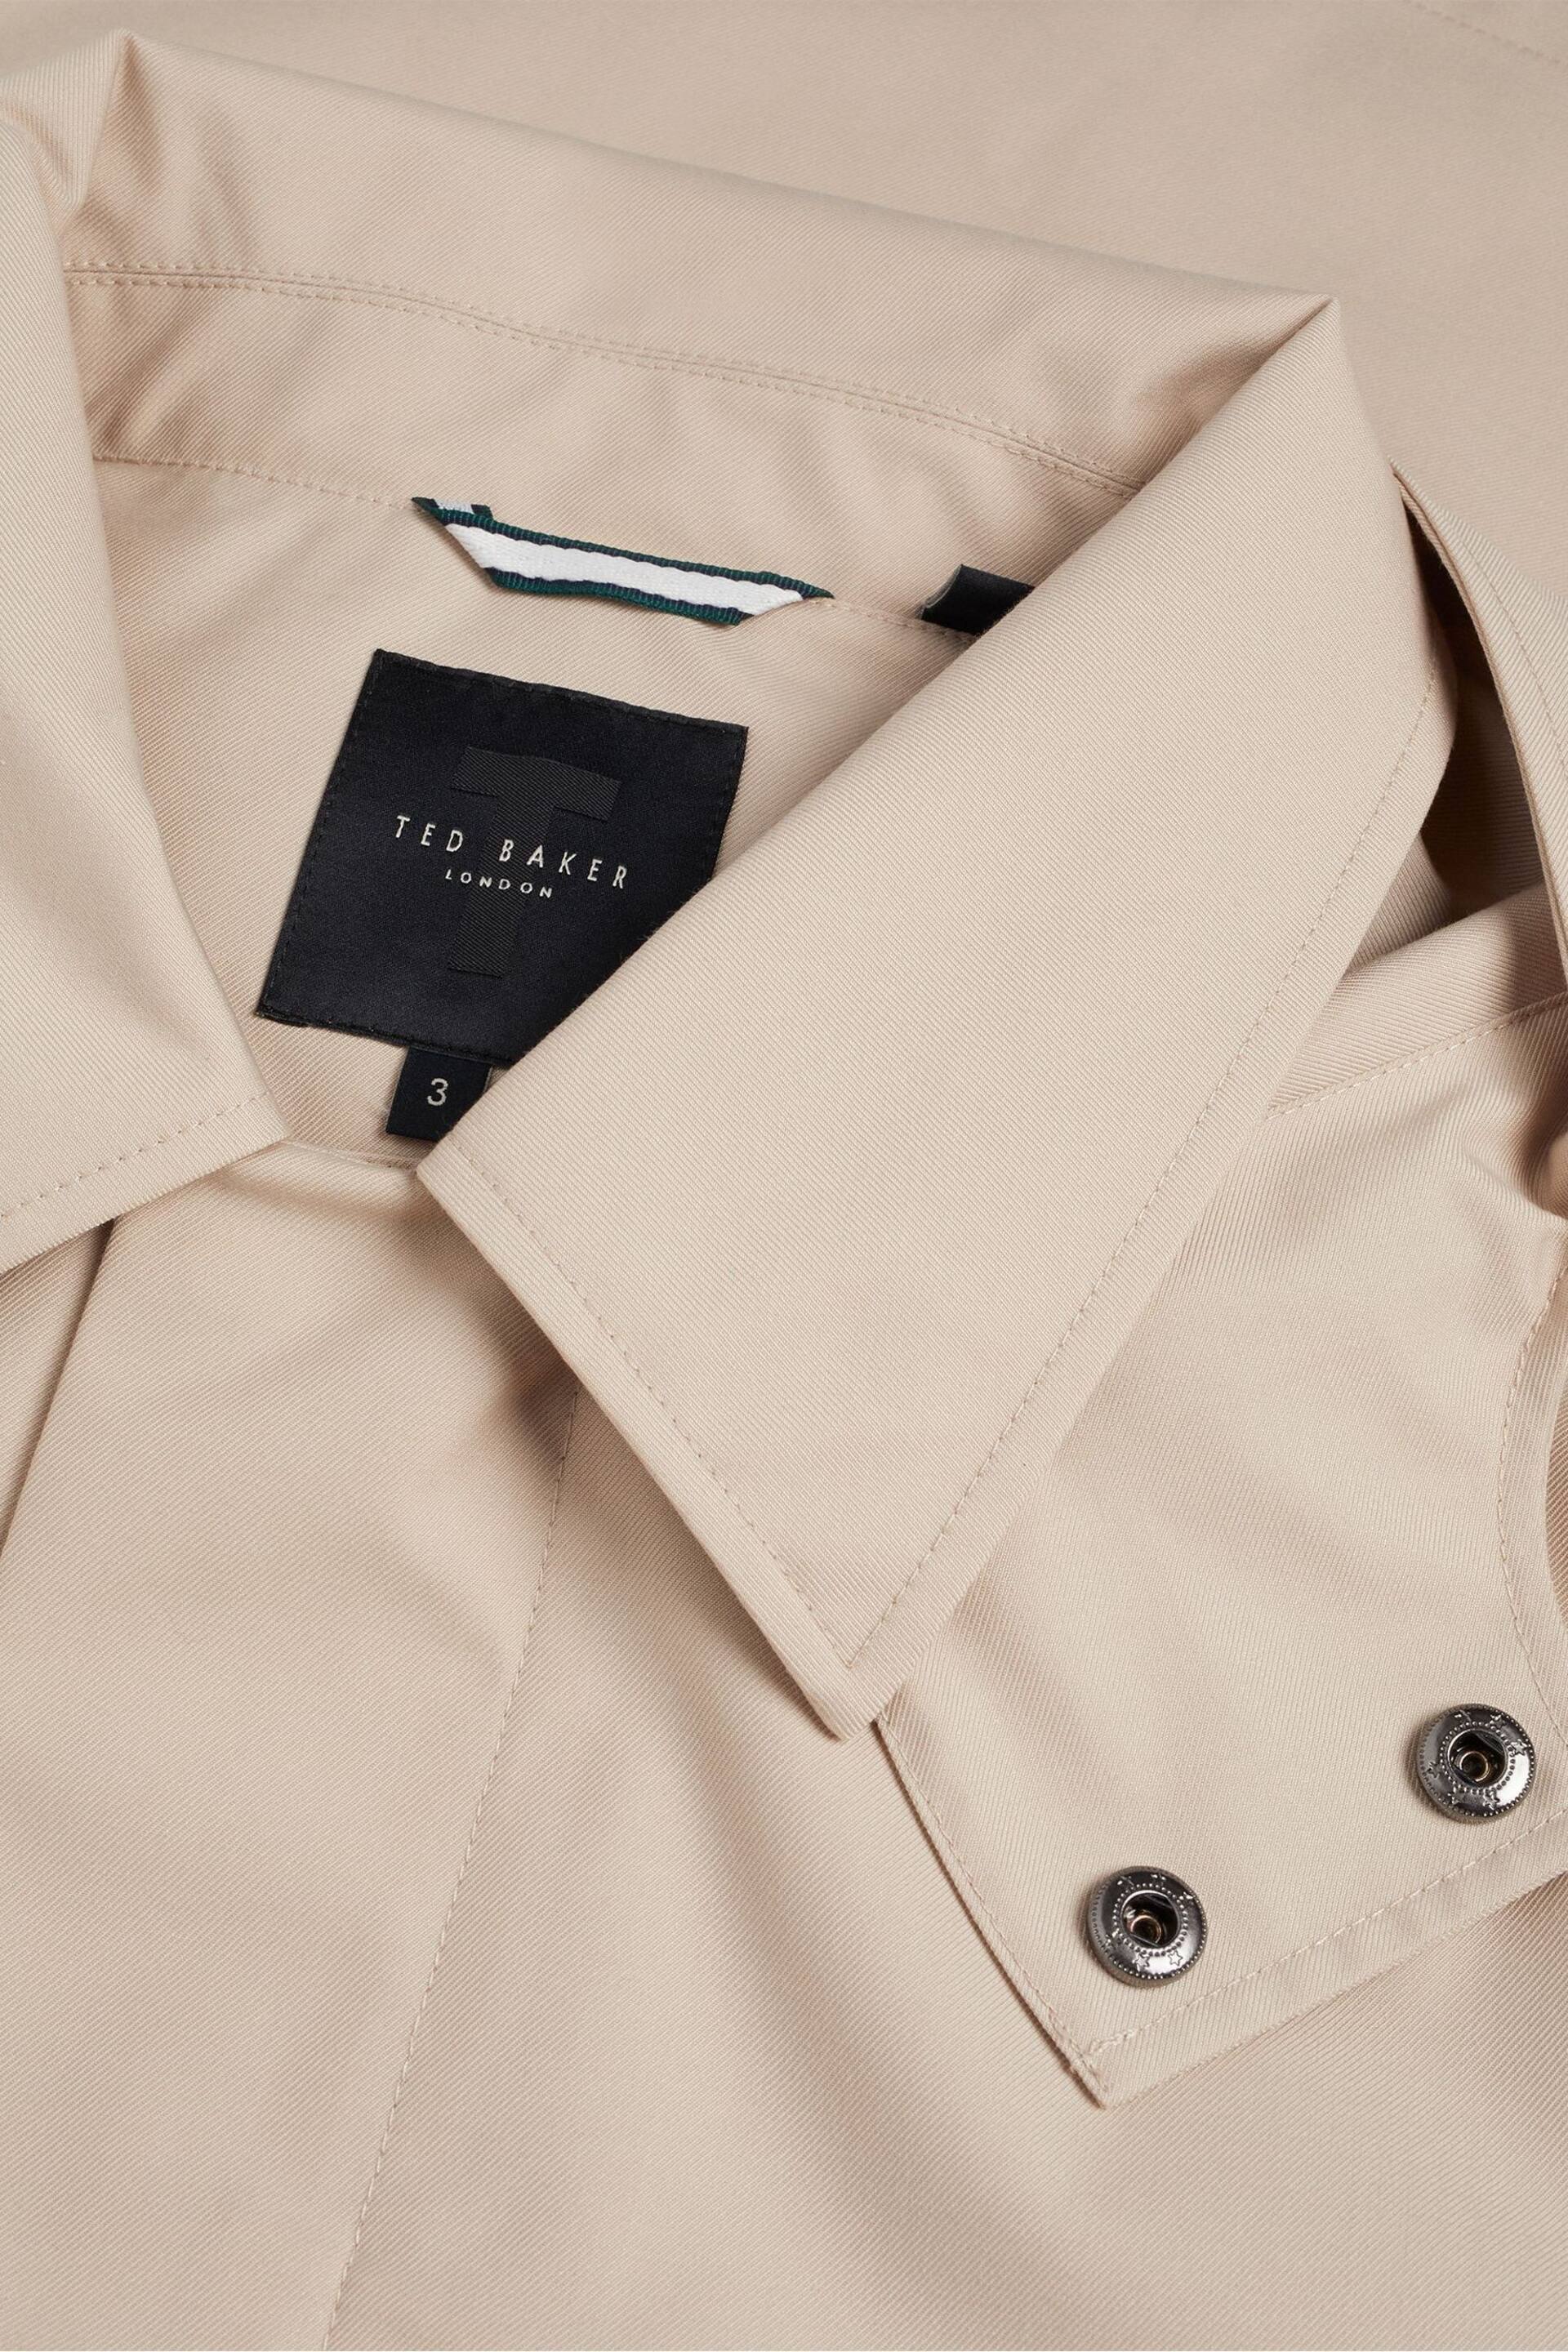 Ted Baker Brown Batterc Hooded Commuter Trench Jacket - Image 3 of 6